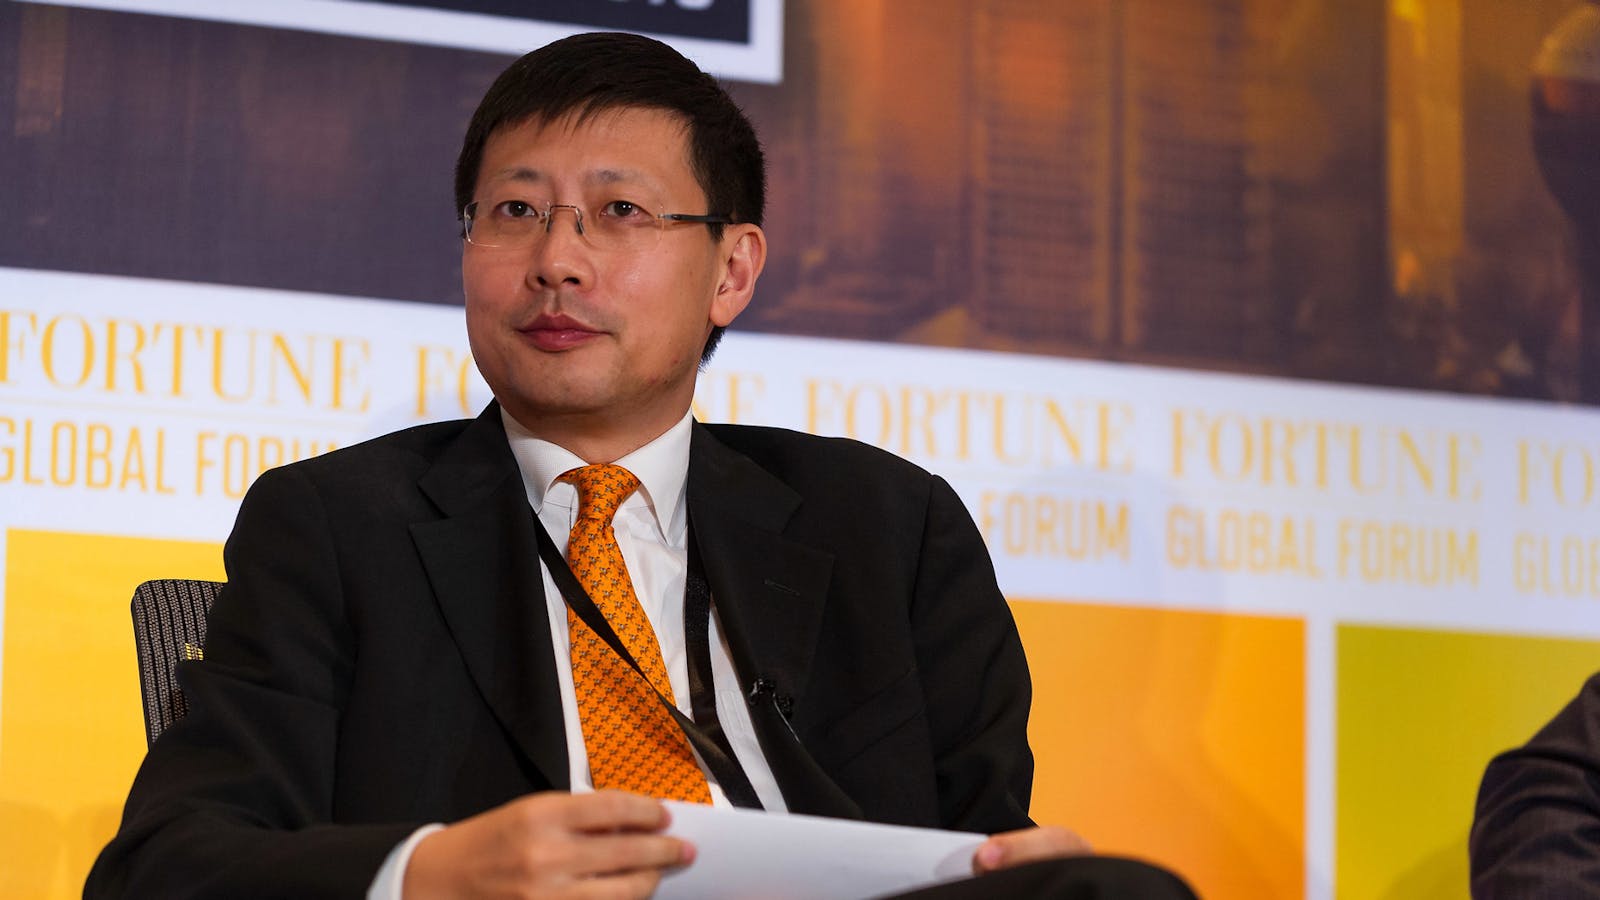 Neil Shen, head of Sequoia China, in 2013. Photo: Fortune via Flickr